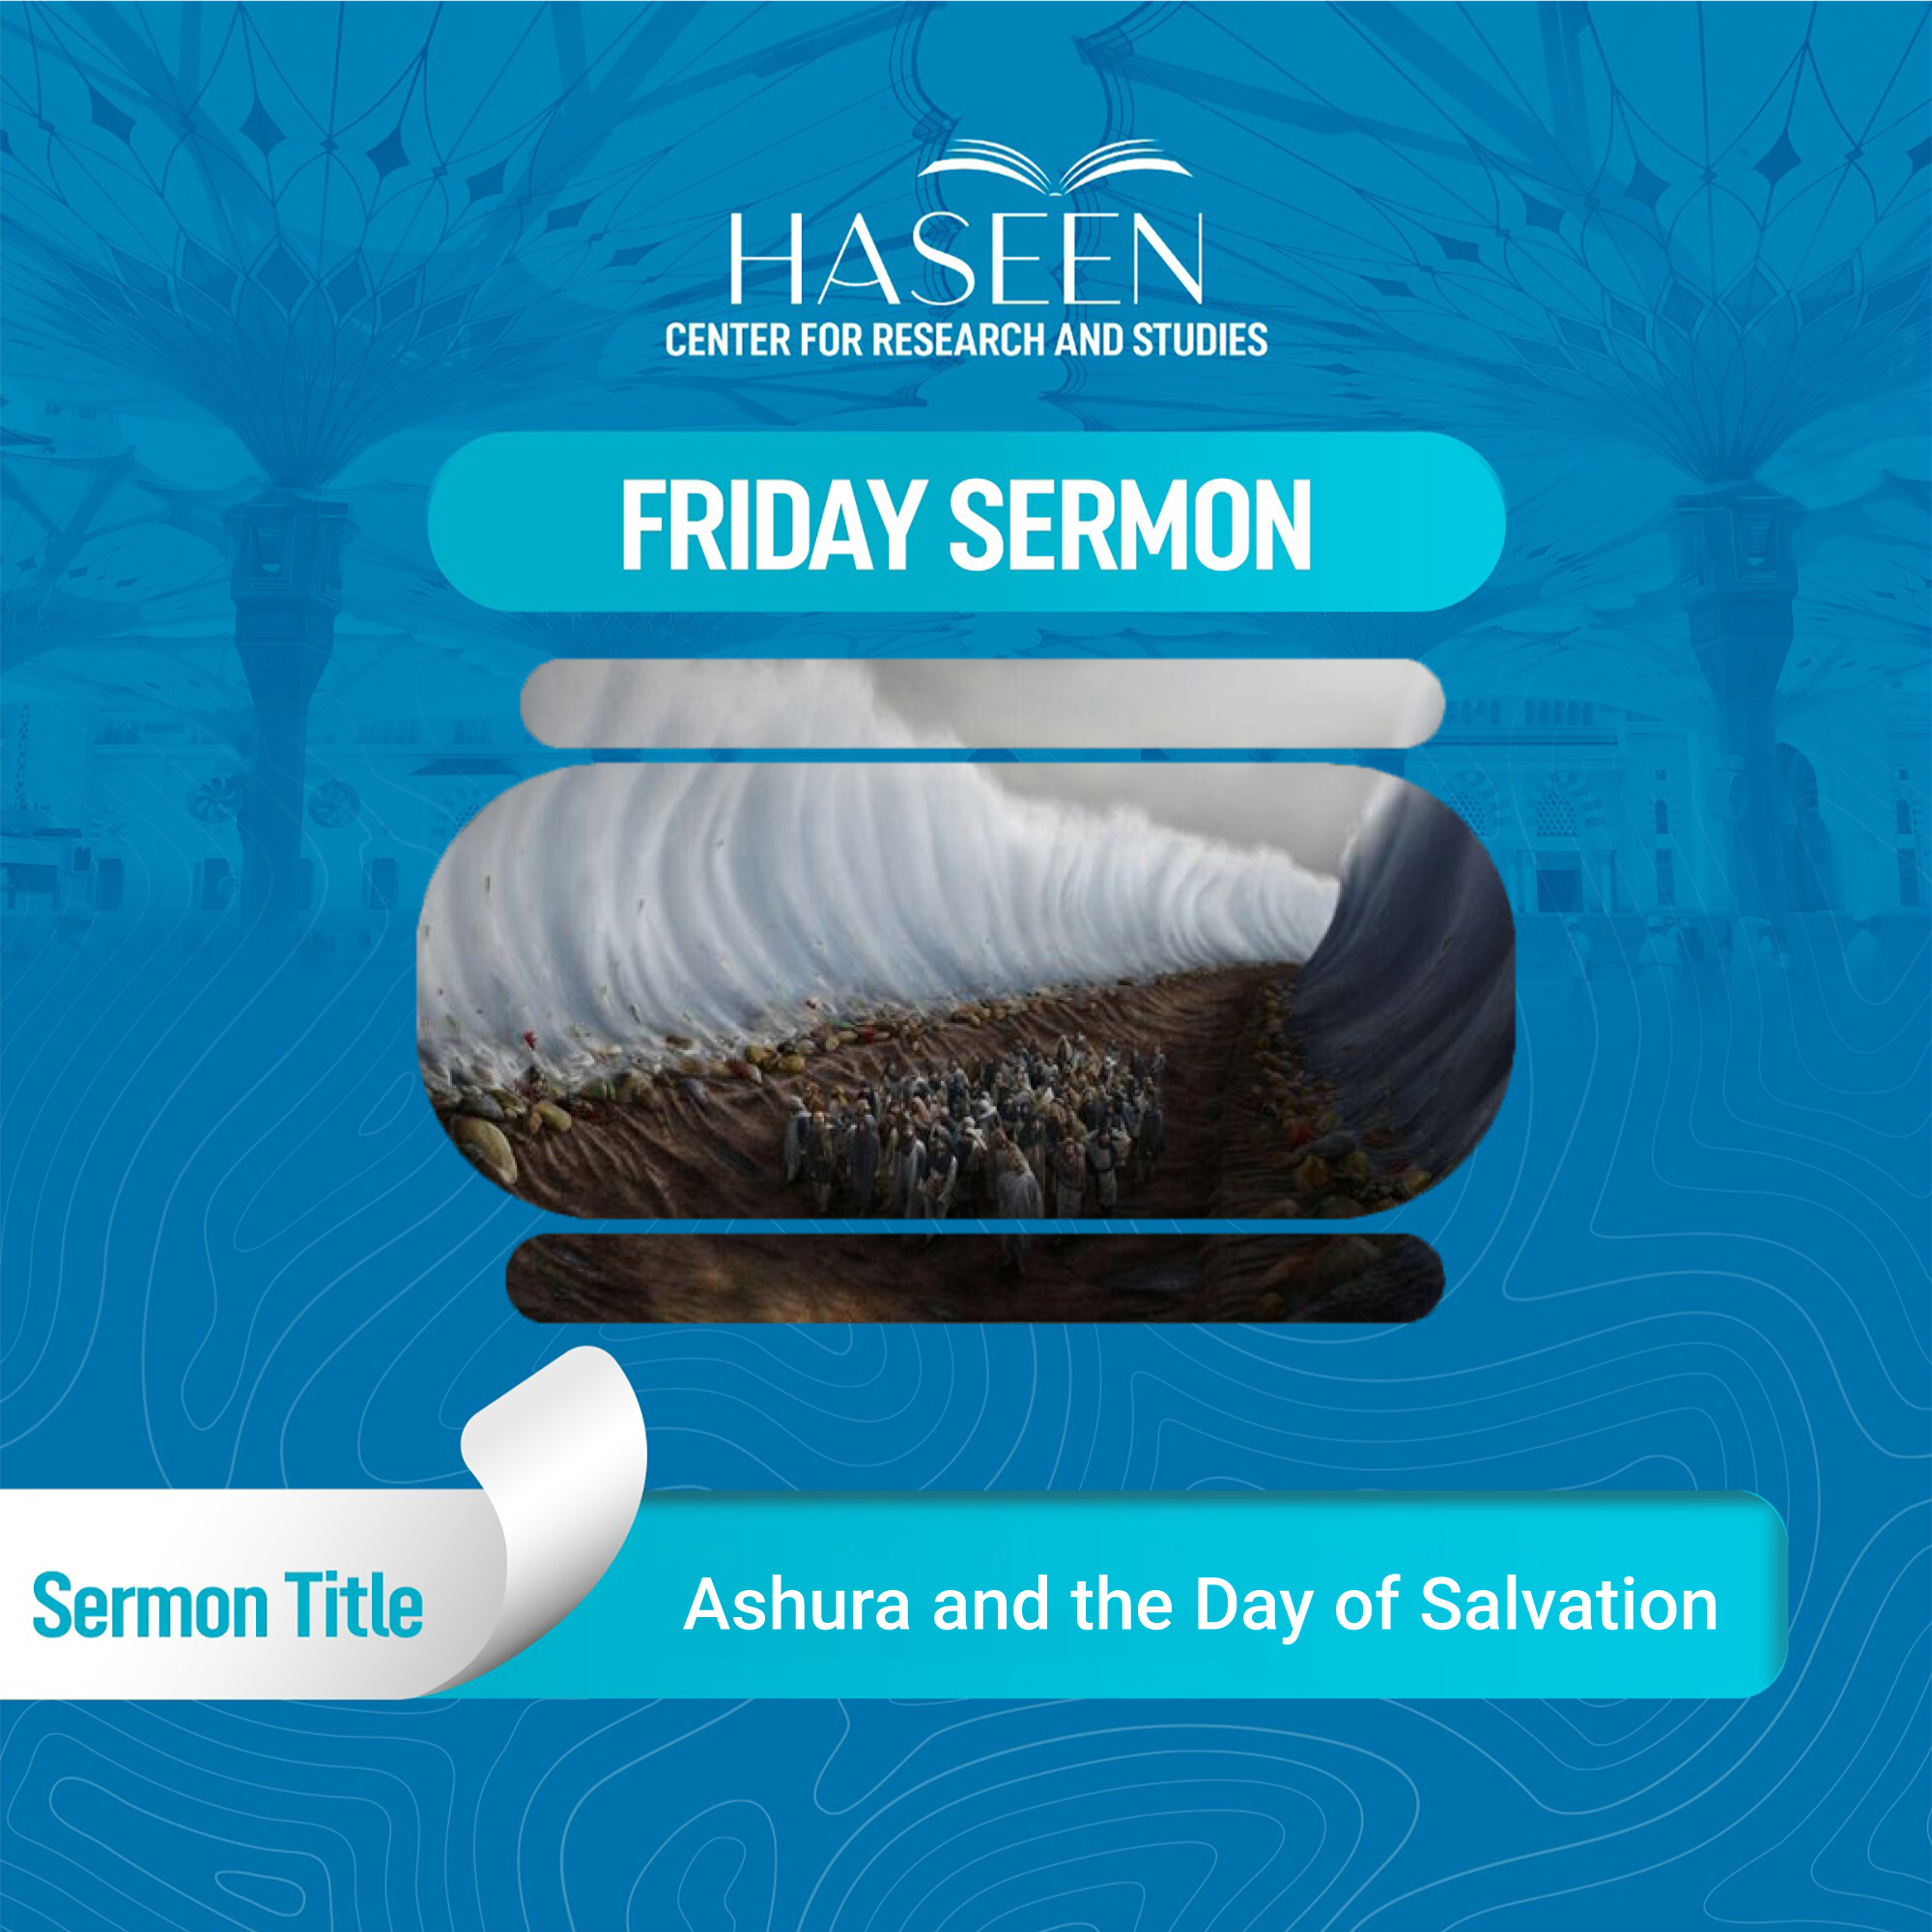 Sermon Title: Ashura and the Day of Salvation